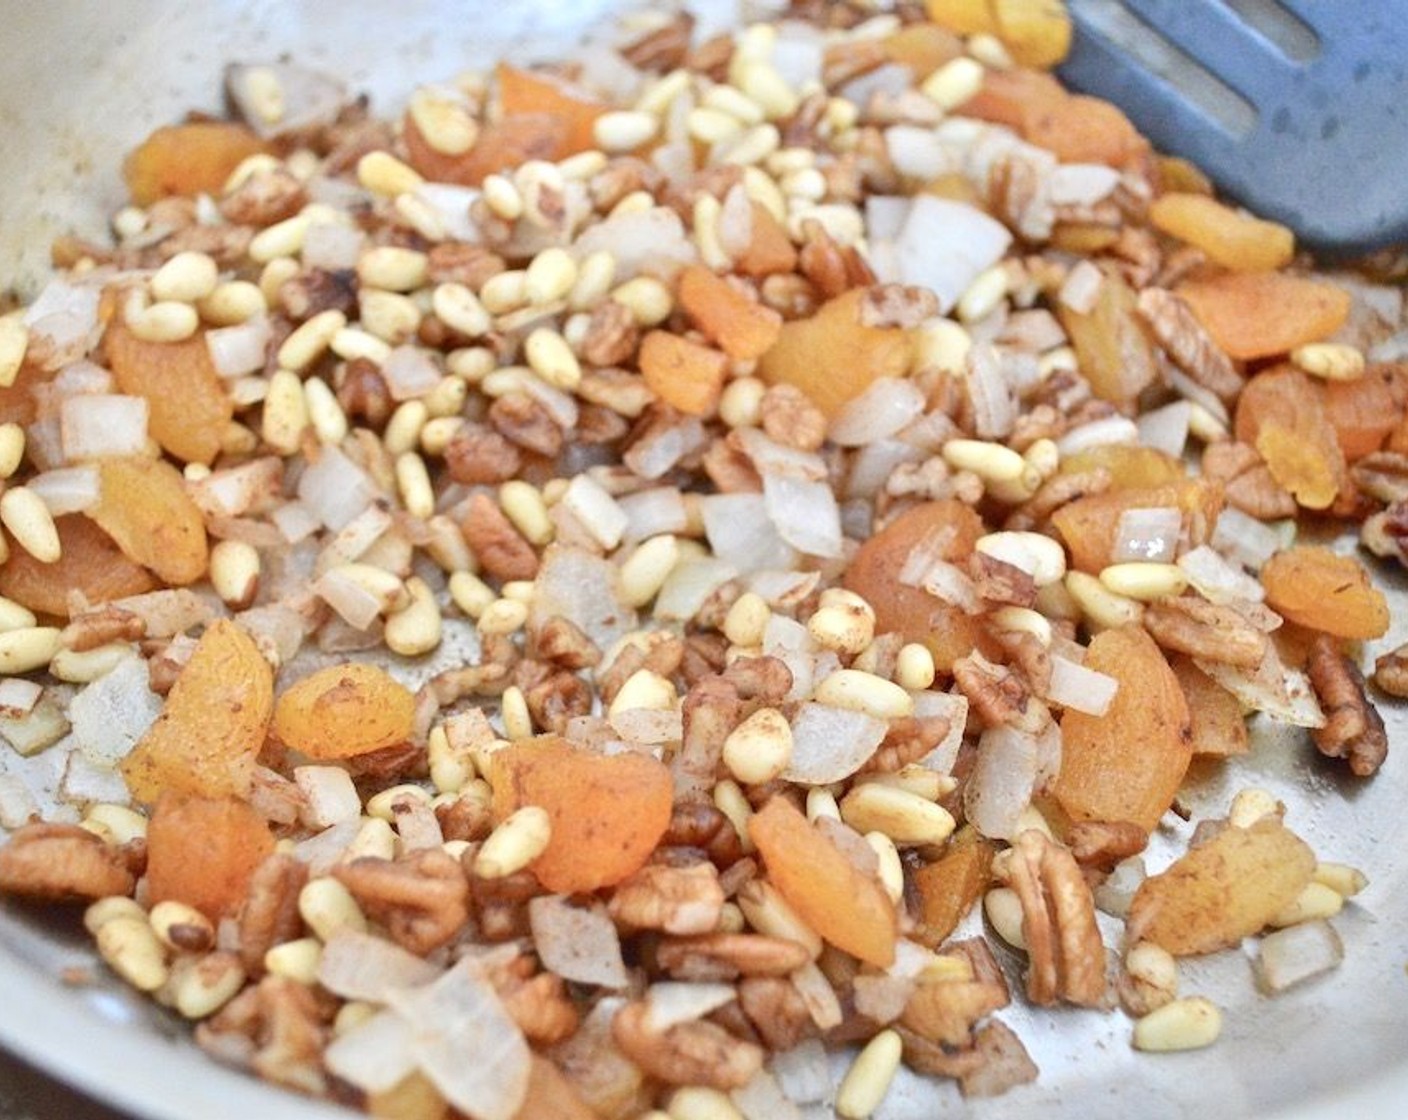 step 2 While it sits, make the filling. Heat the Olive Oil (1 dash) in a skillet over medium low heat. Then add the Onion (1), Pine Nuts (1/3 cup), Pecans (1/3 cup), Dried Apricot (1/3 cup), and Ground Cinnamon (1/2 tsp) in and let them get fragrant for a couple of minutes while you stir it.